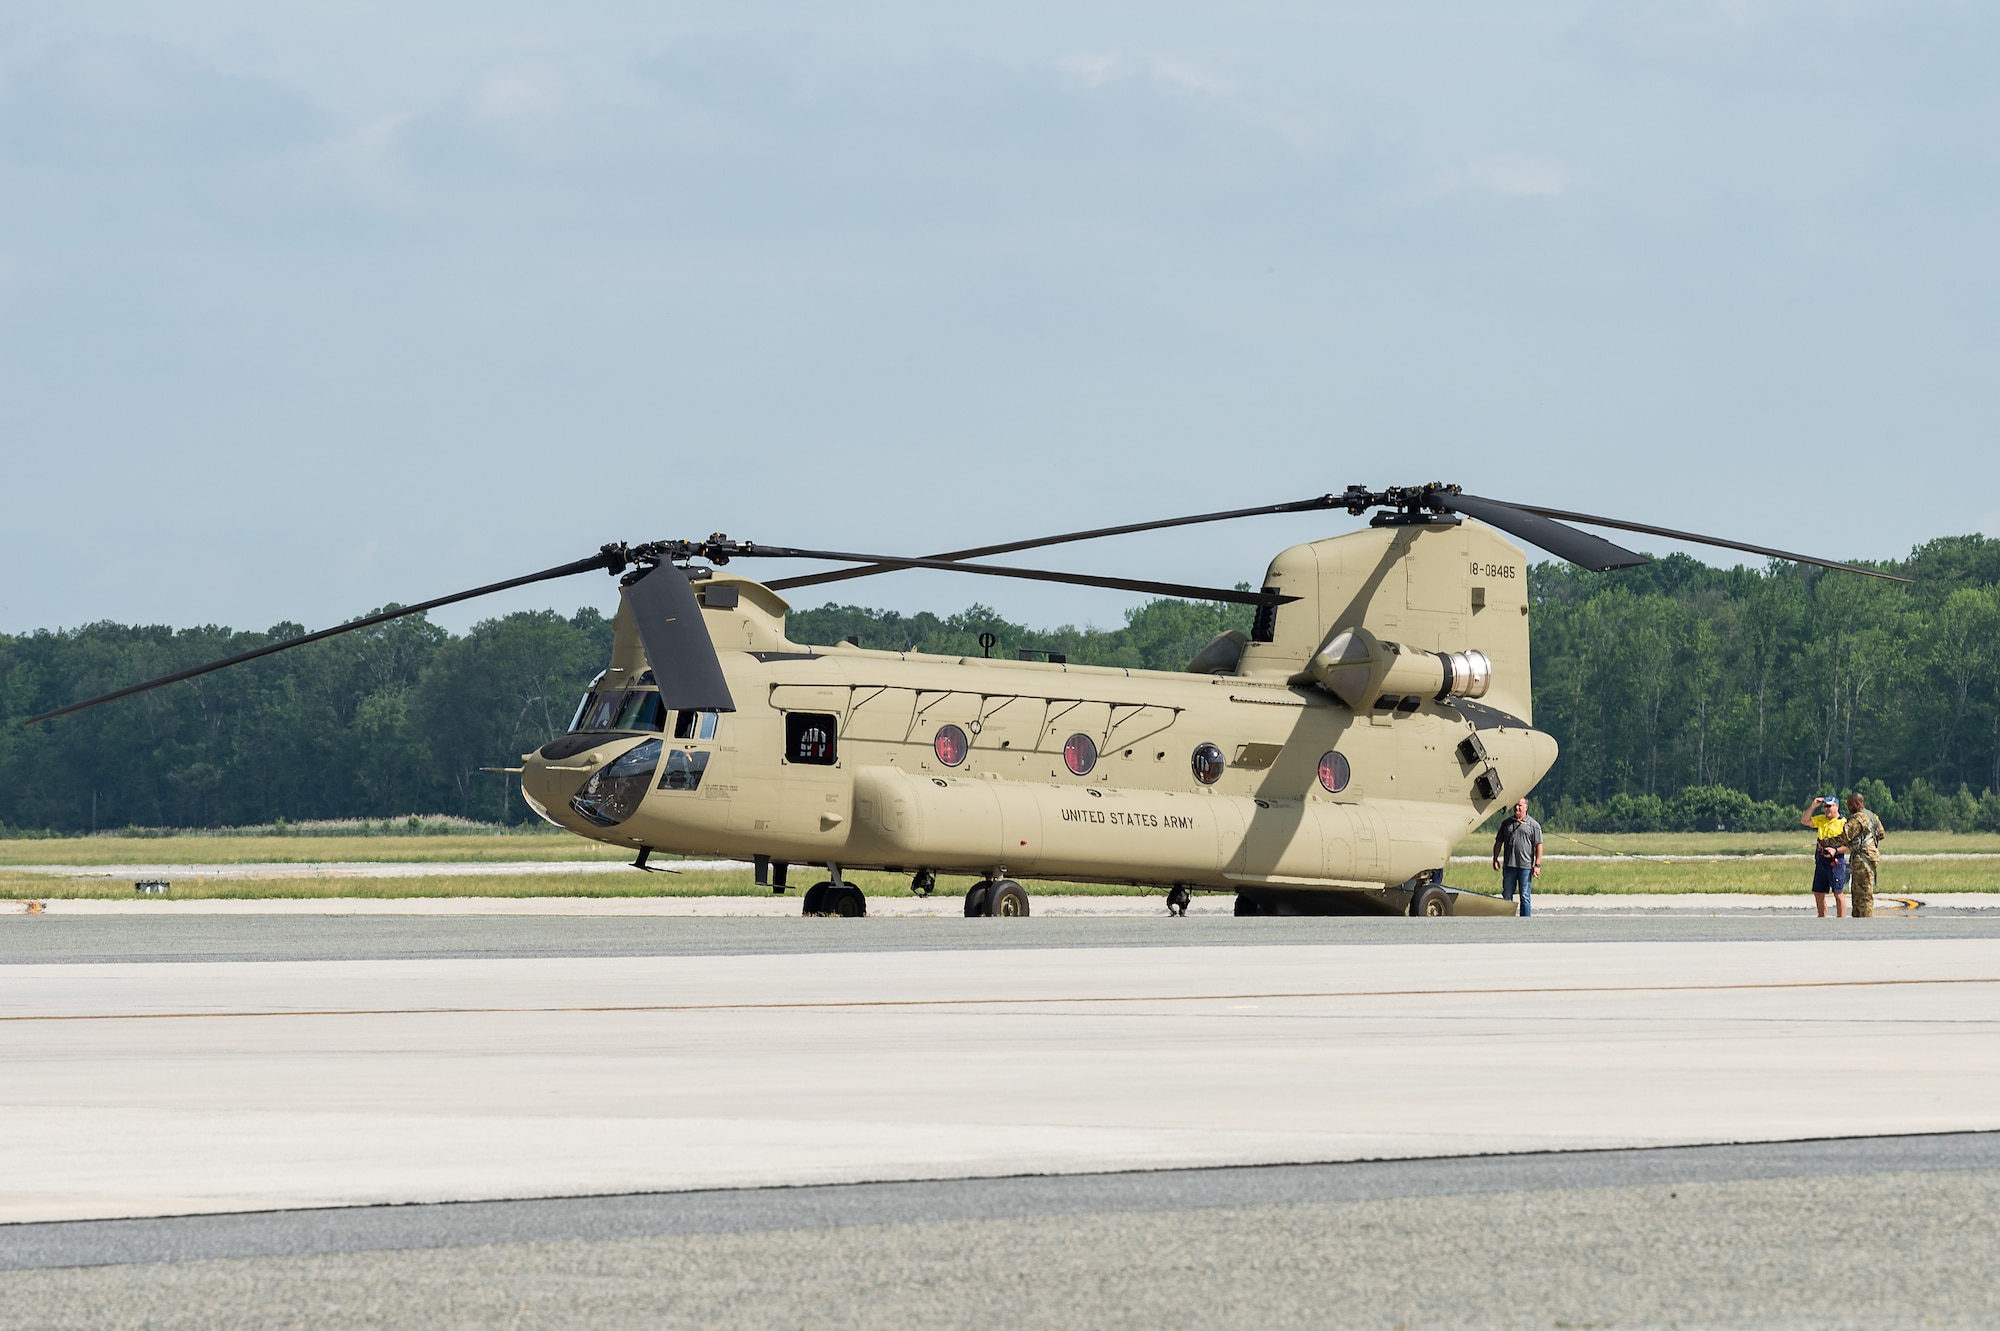 A CH-47F Chinook helicopter sits on the flight line at Dover Air Force Base, Delaware, June 8, 2021. A Boeing Defence Australia maintenance team prepared two Chinooks for shipment aboard a C-5M Super Galaxy to Royal Australian Air Force Base Townsville, Australia, as part of the U.S. government’s foreign military sales program. The U.S.-Australia alliance is an anchor for peace and stability in the Indo-Pacific region and around the world. (U.S. Air Force photo by Roland Balik)